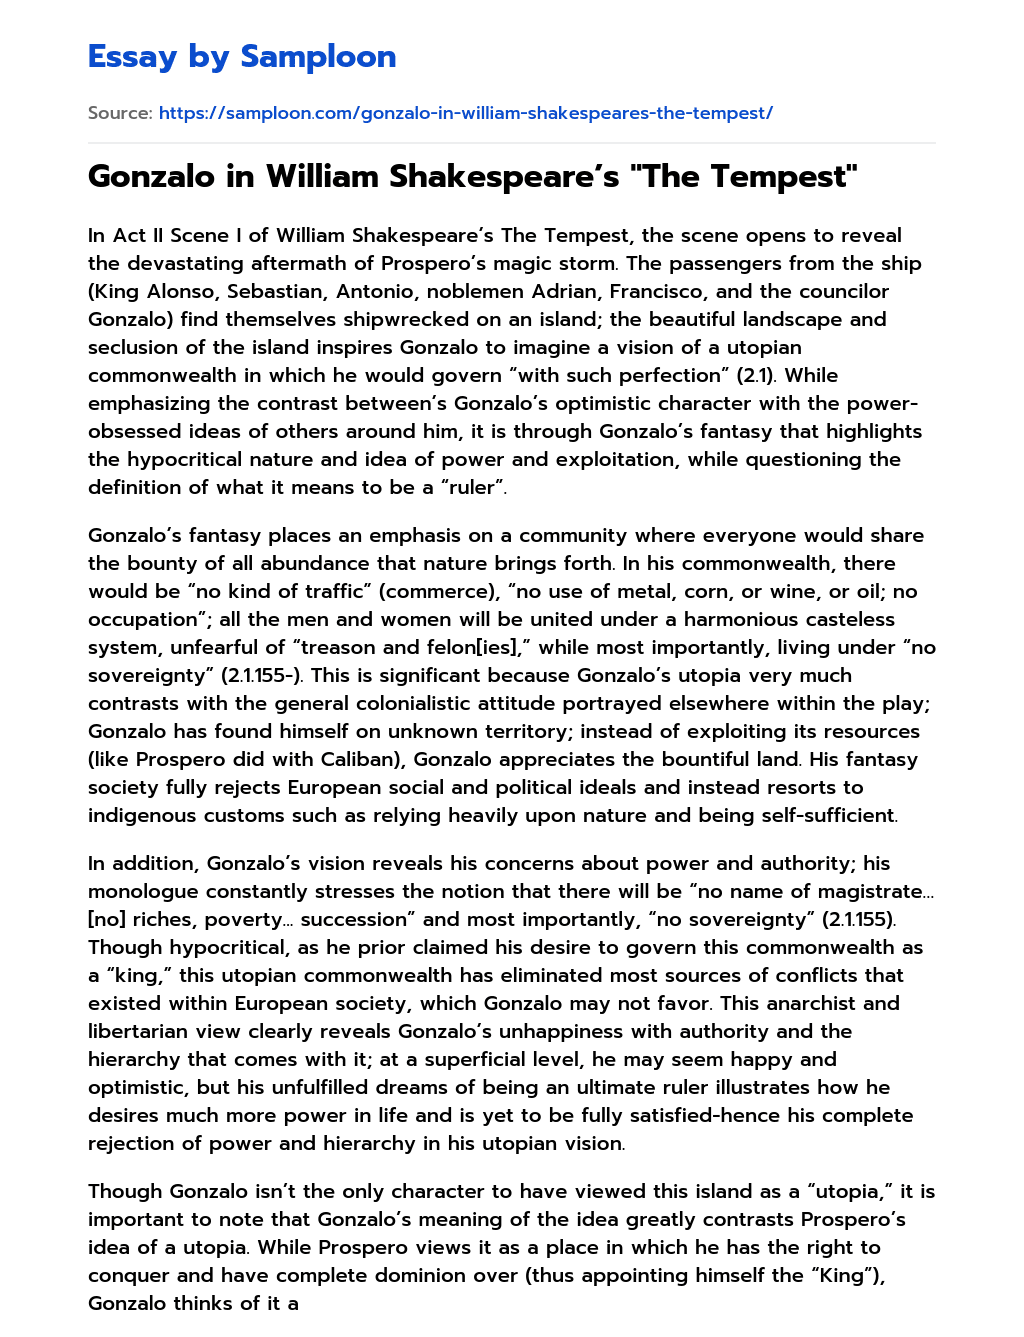 Gonzalo in William Shakespeare’s “The Tempest” Analytical Essay essay